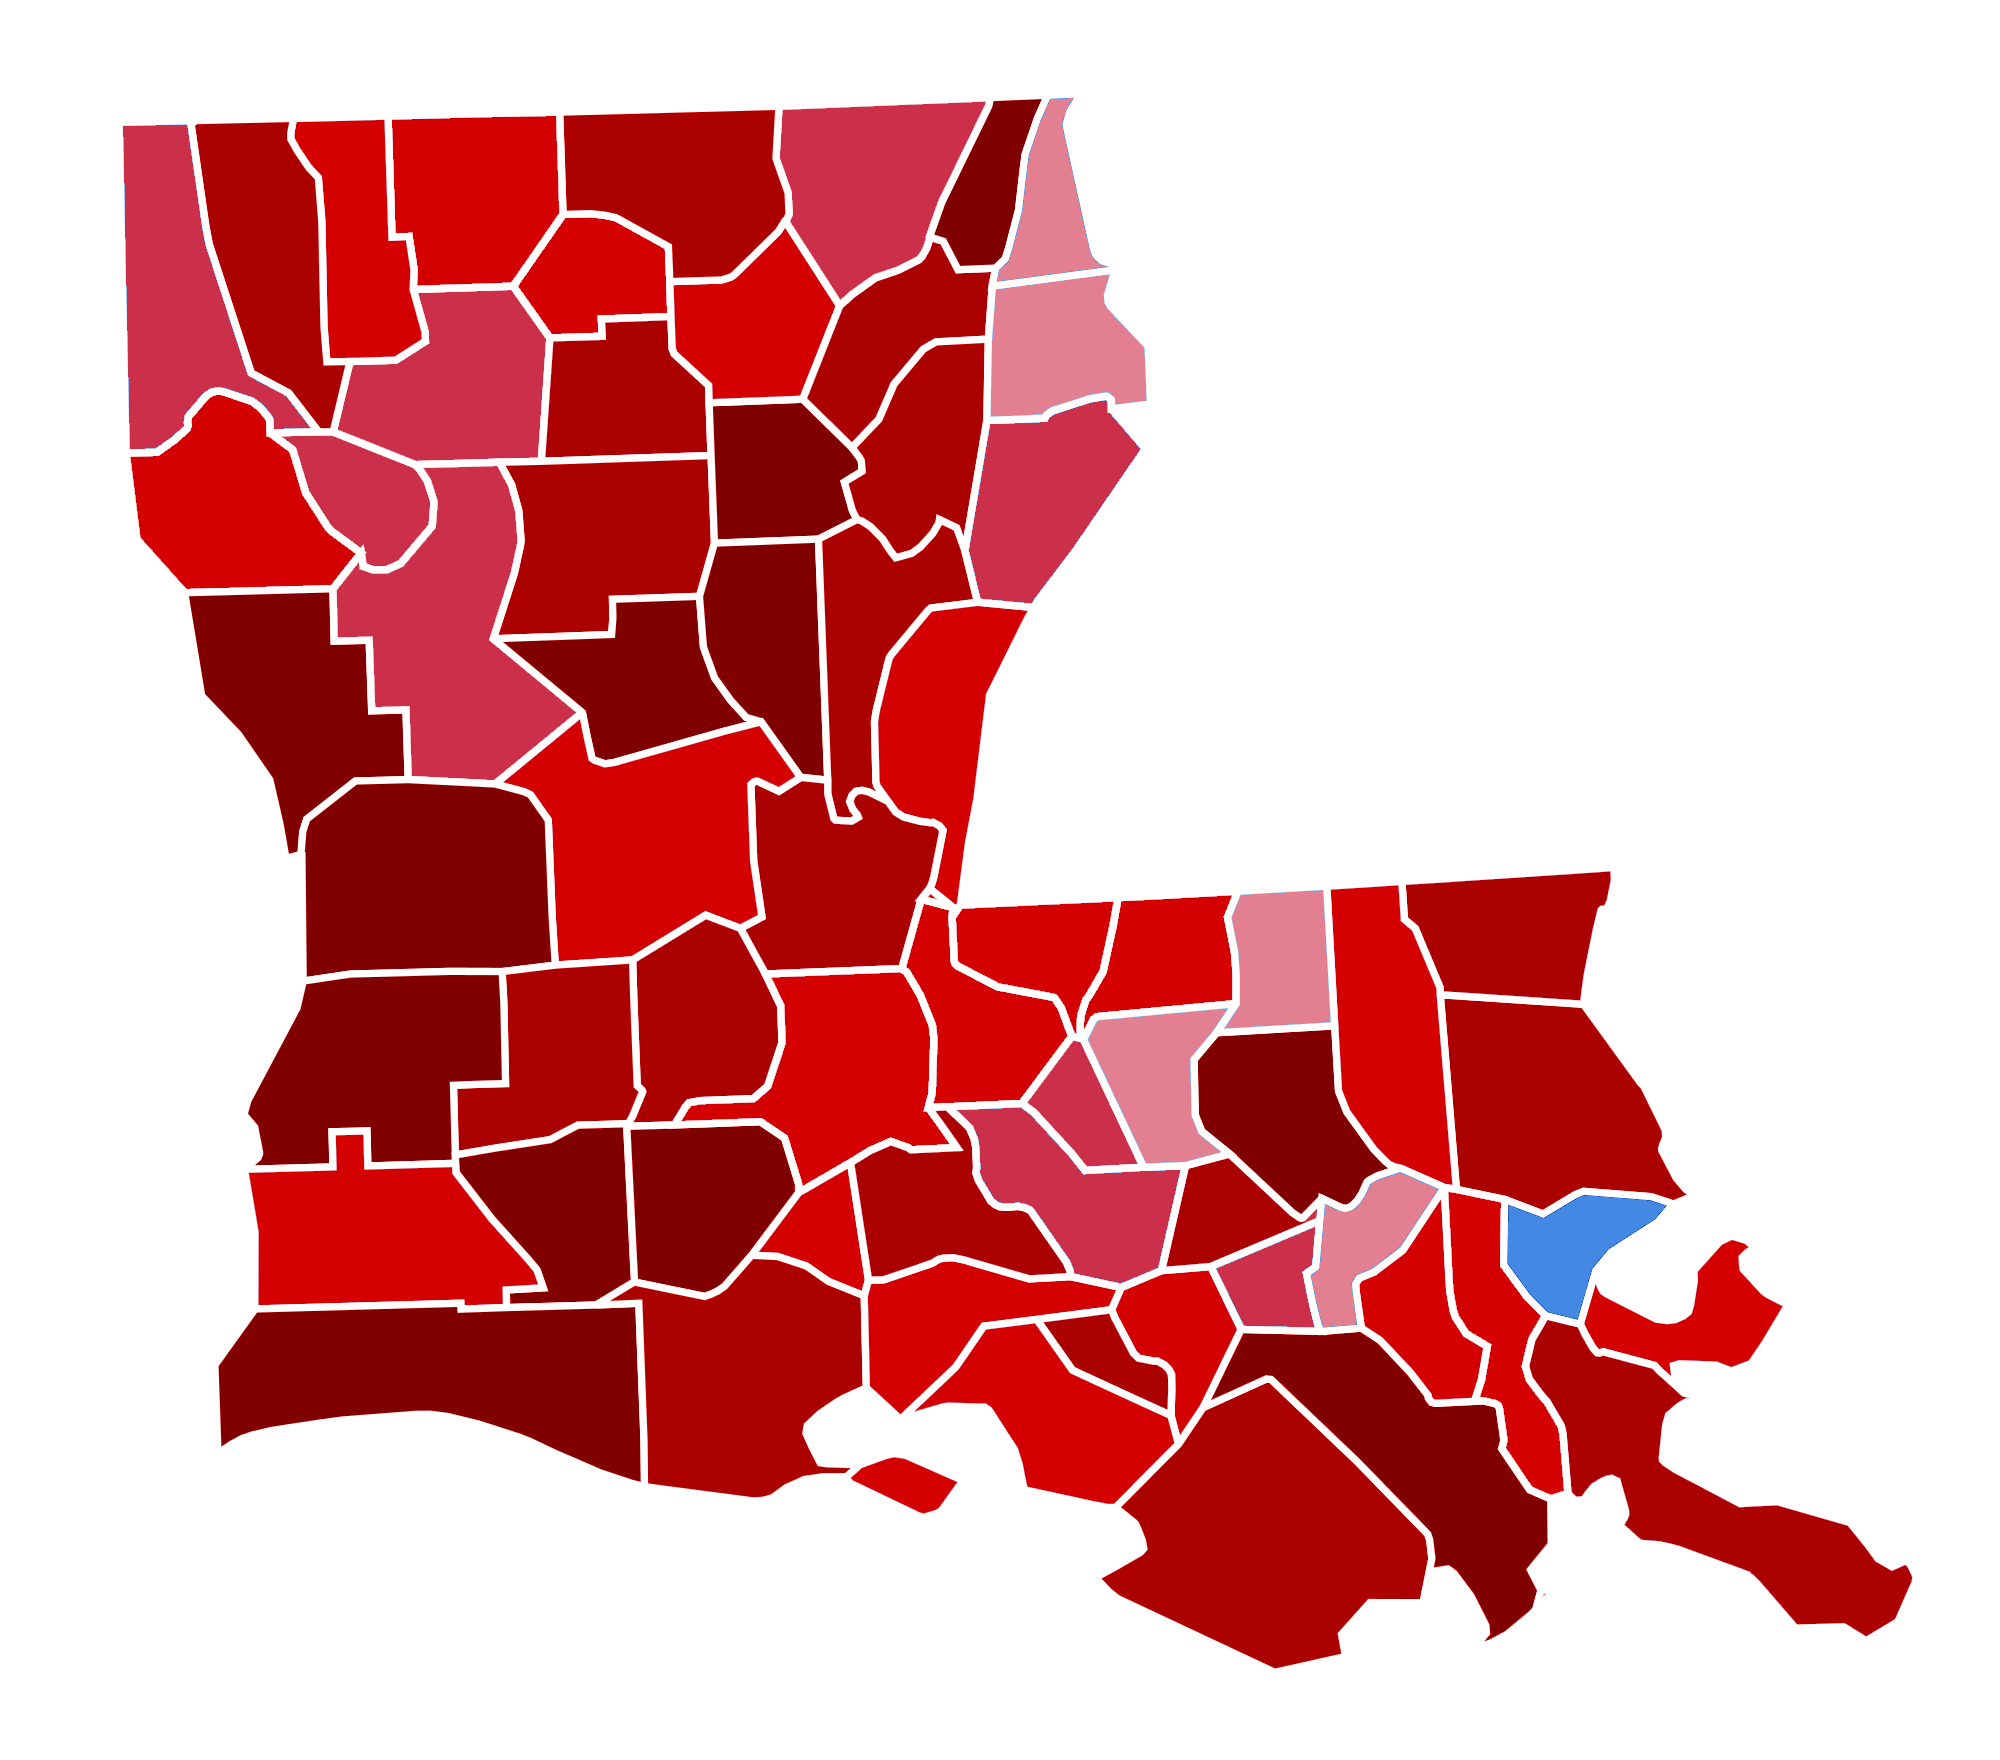 Louisiana_Presidential_Election_Results_2016_Republican_Landslide_15.06%.png